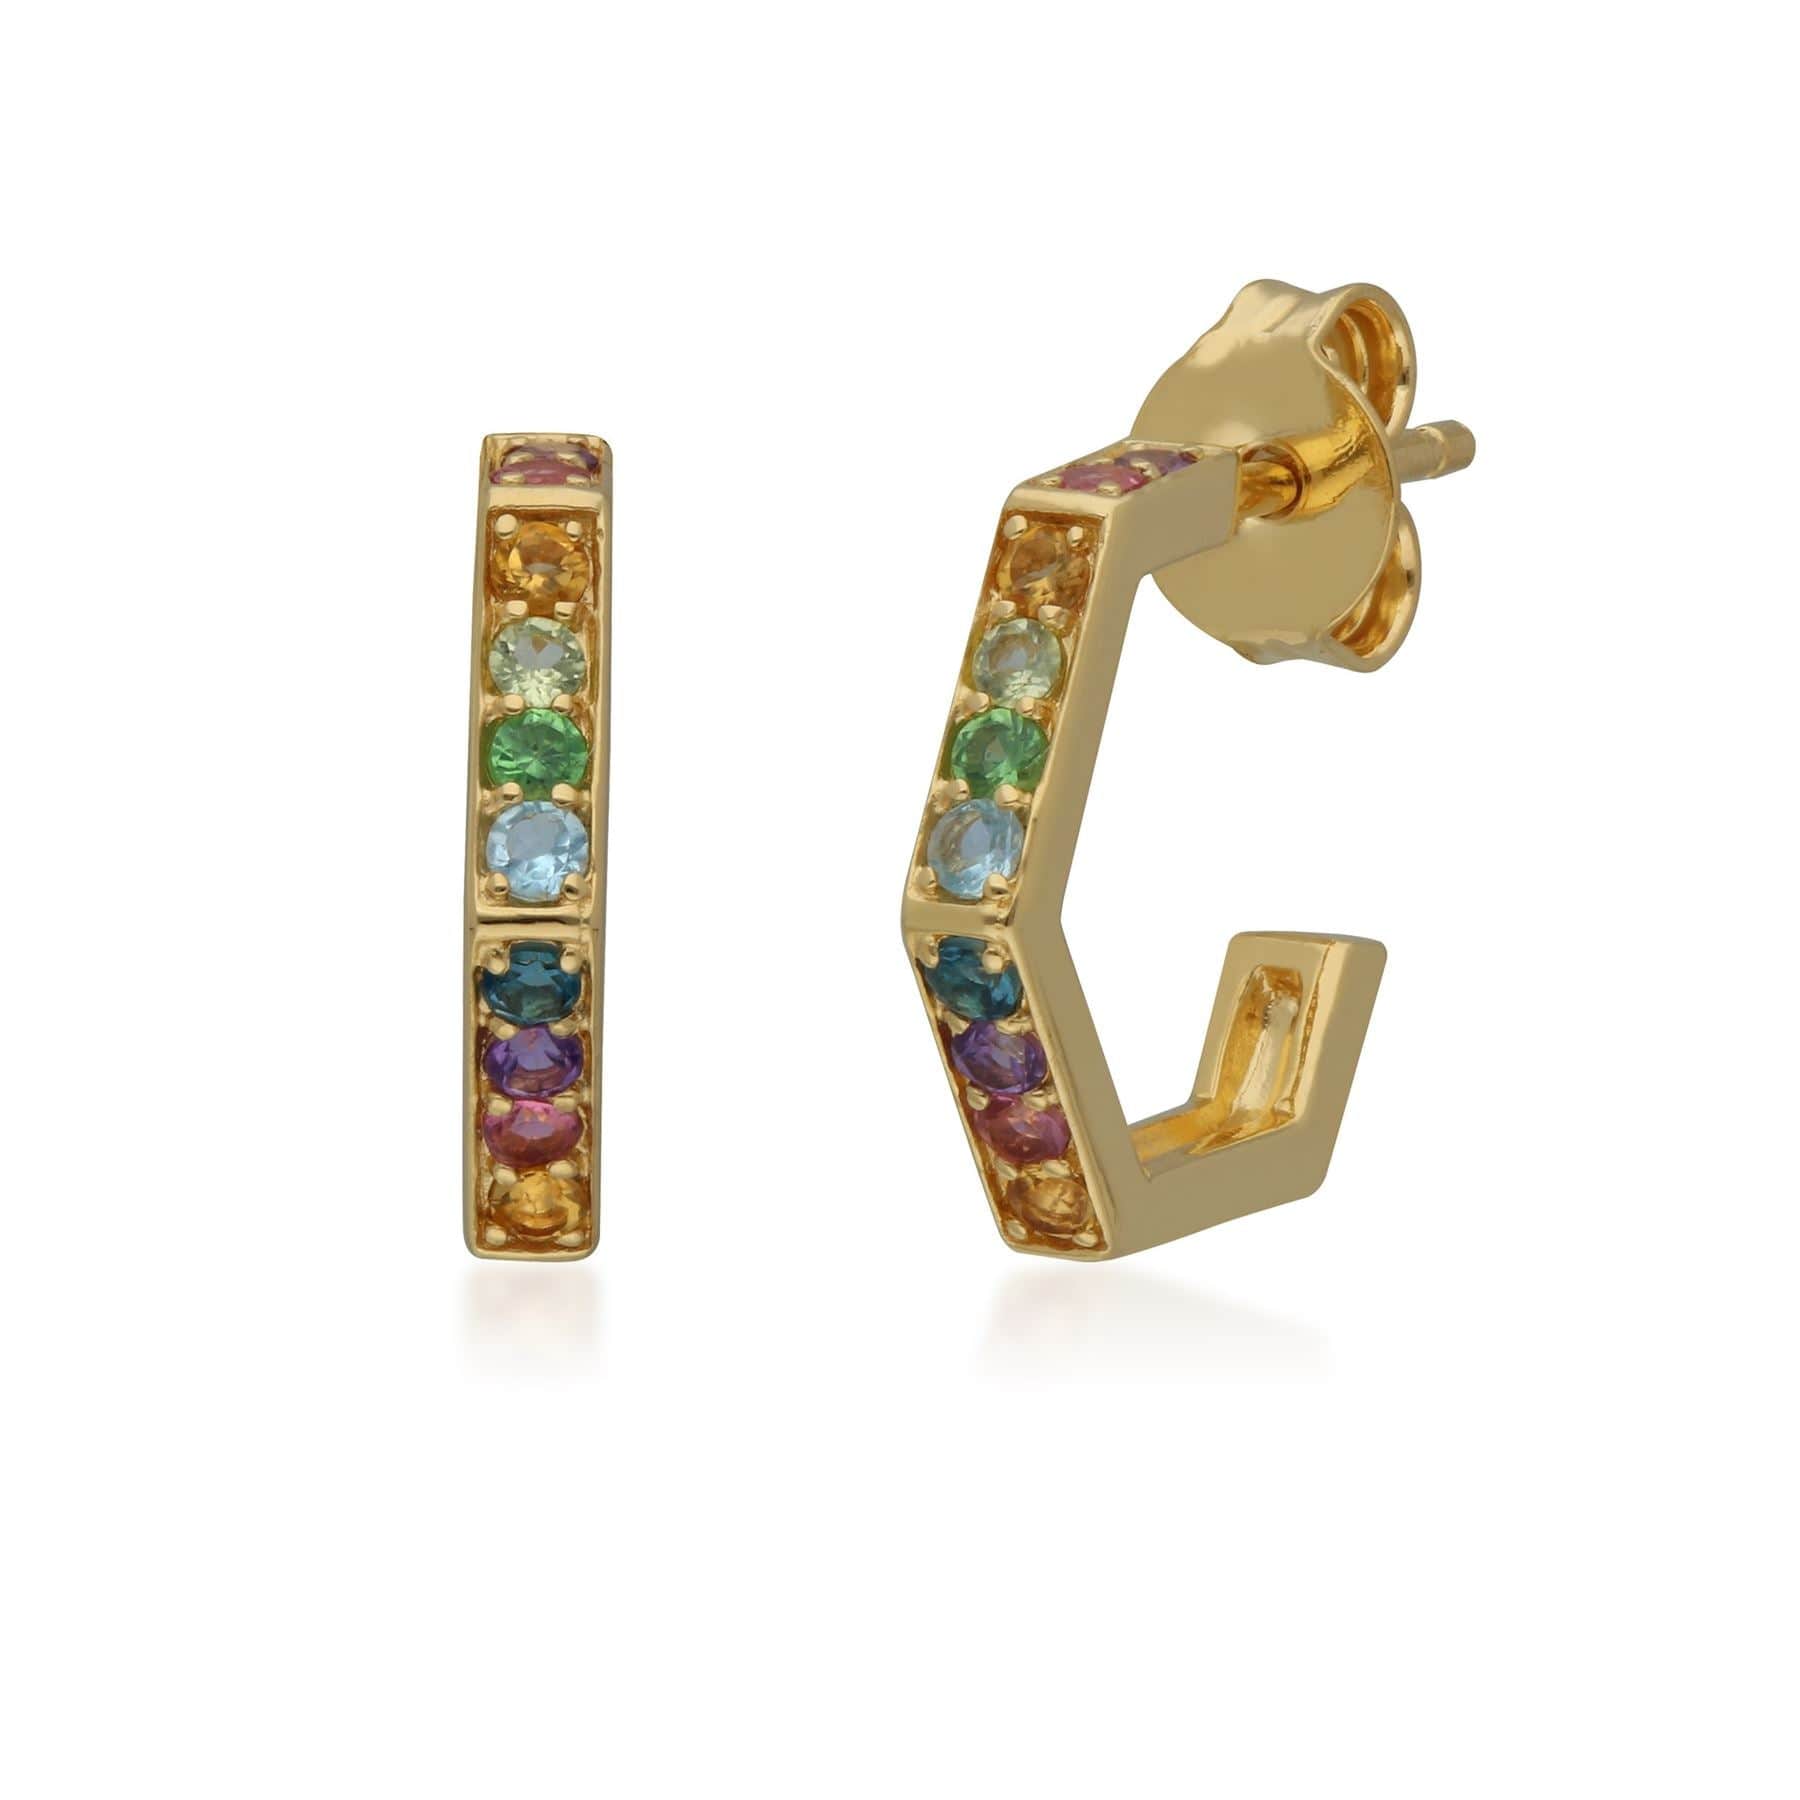 Image of Rainbow Hexagon Hoop Earrings in Gold Plated Sterling Silver